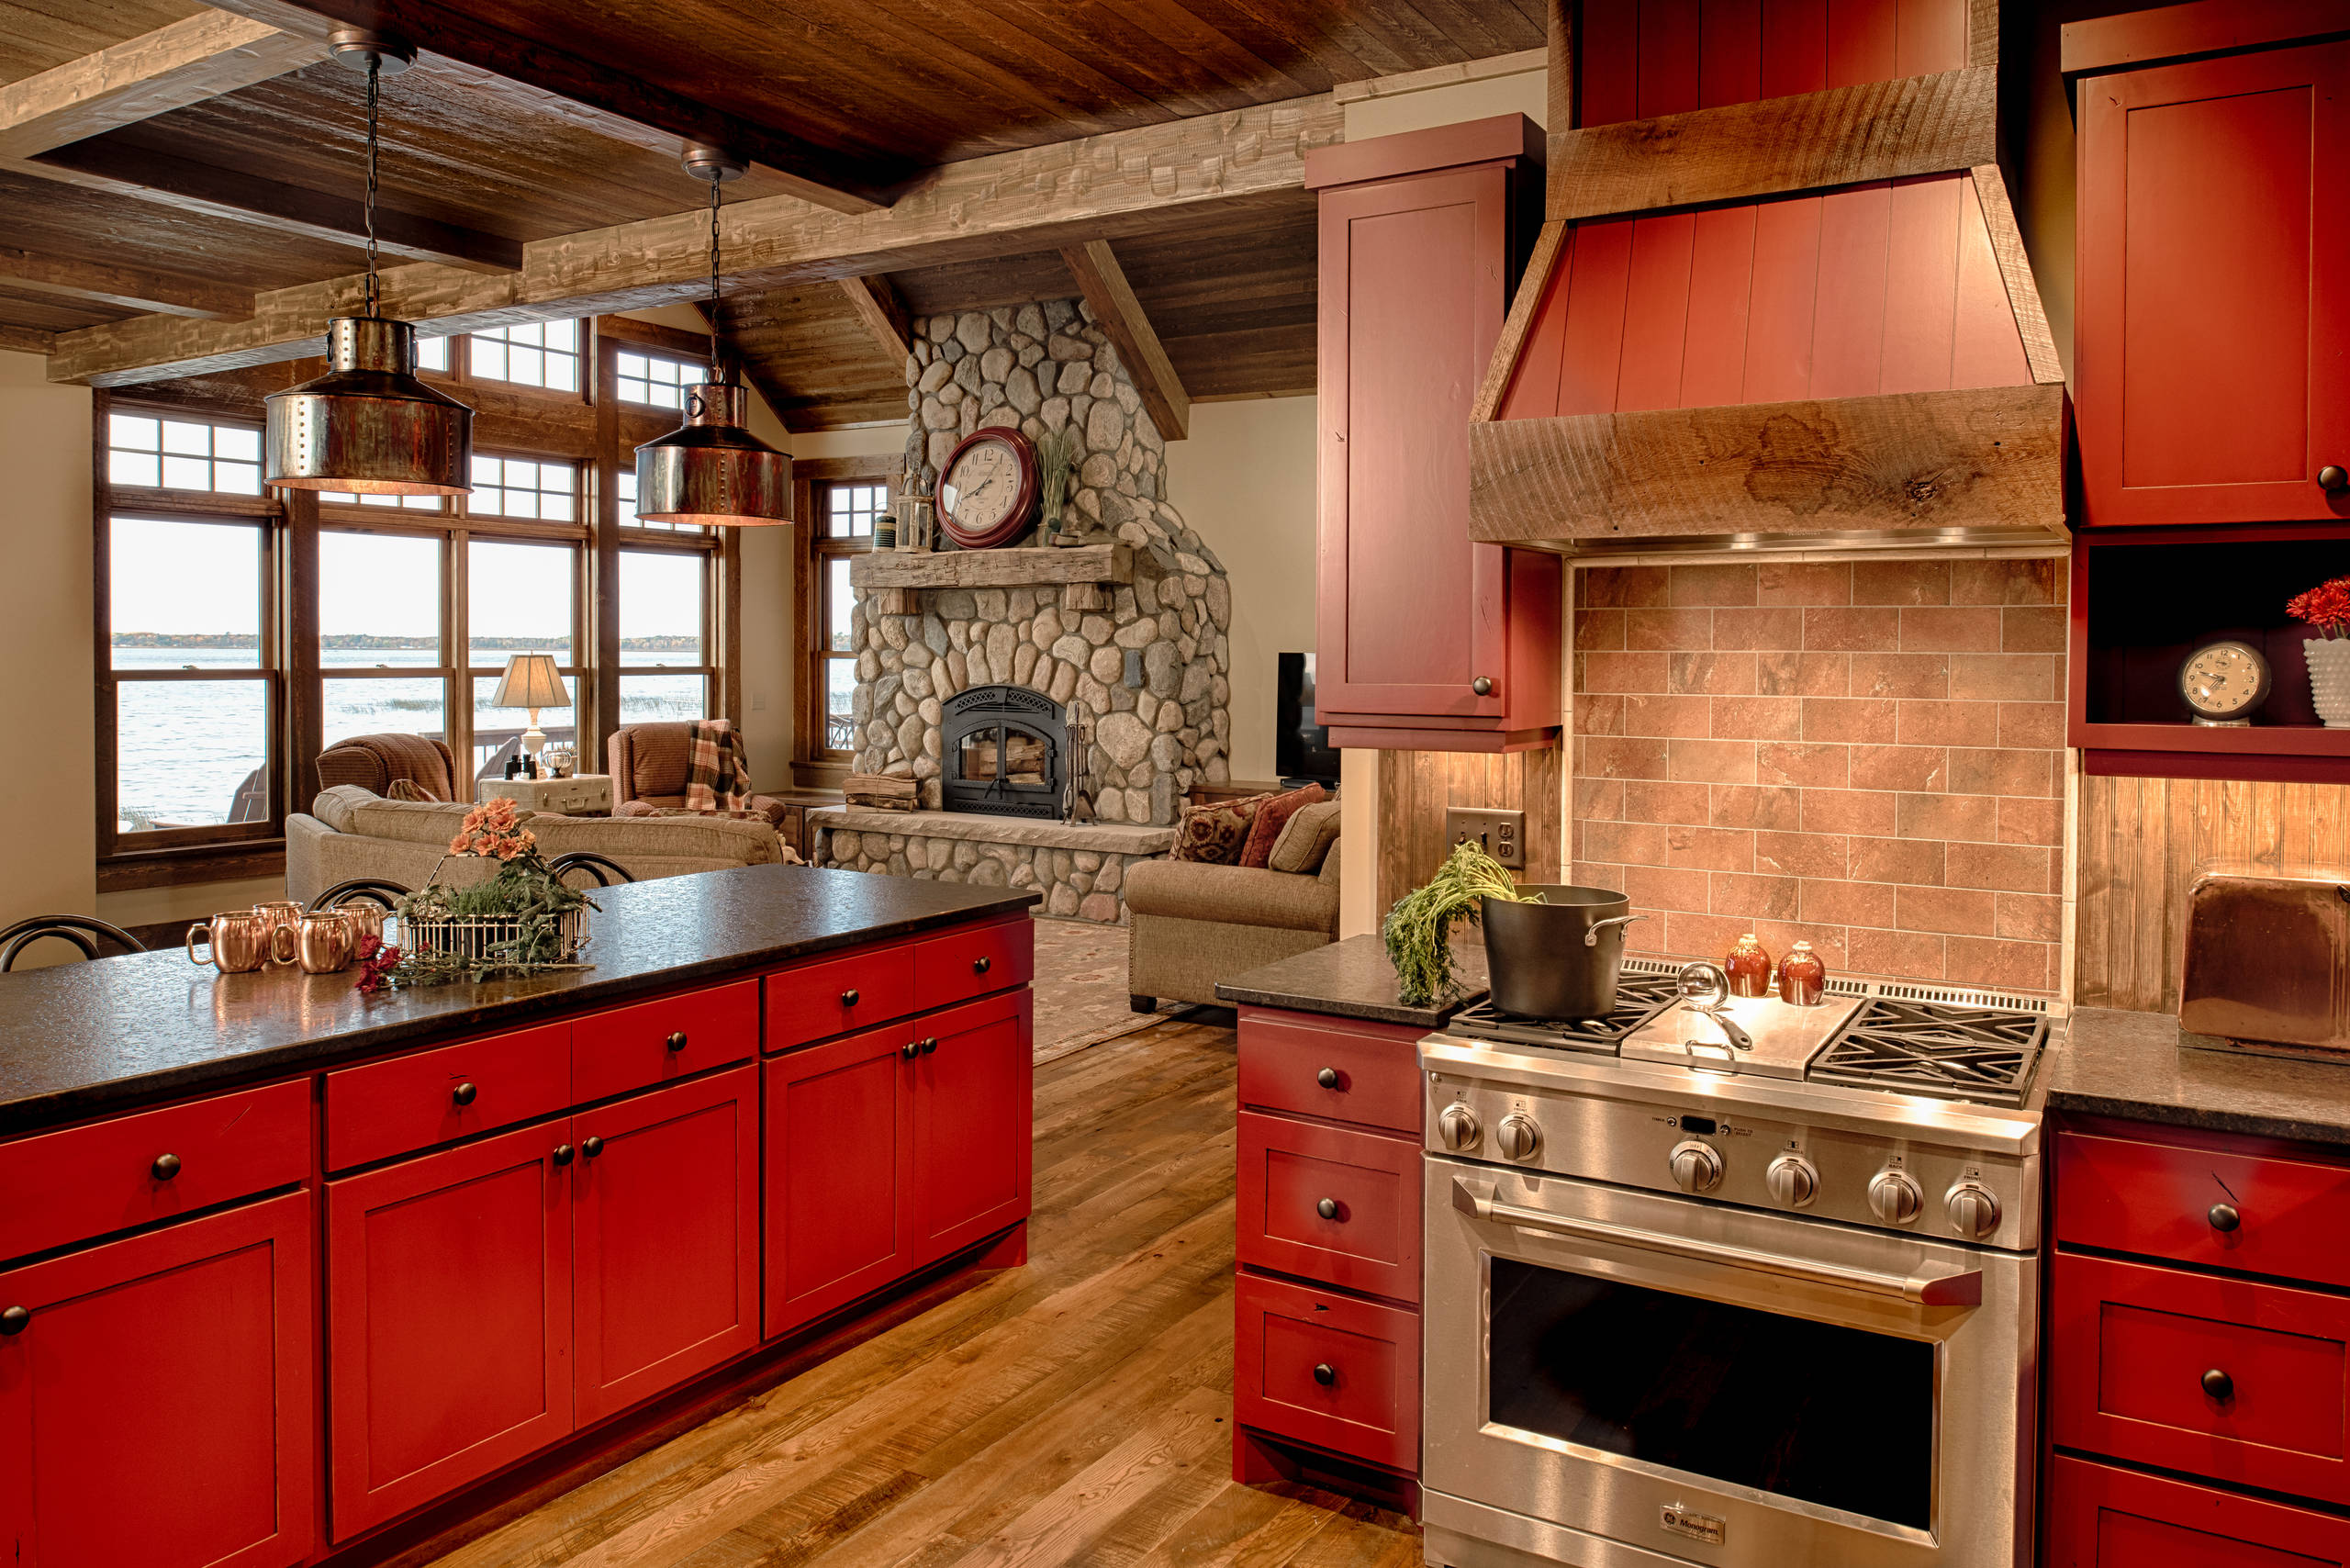 Red kitchen ideas – cabinets and details in shades from rust to scarlet